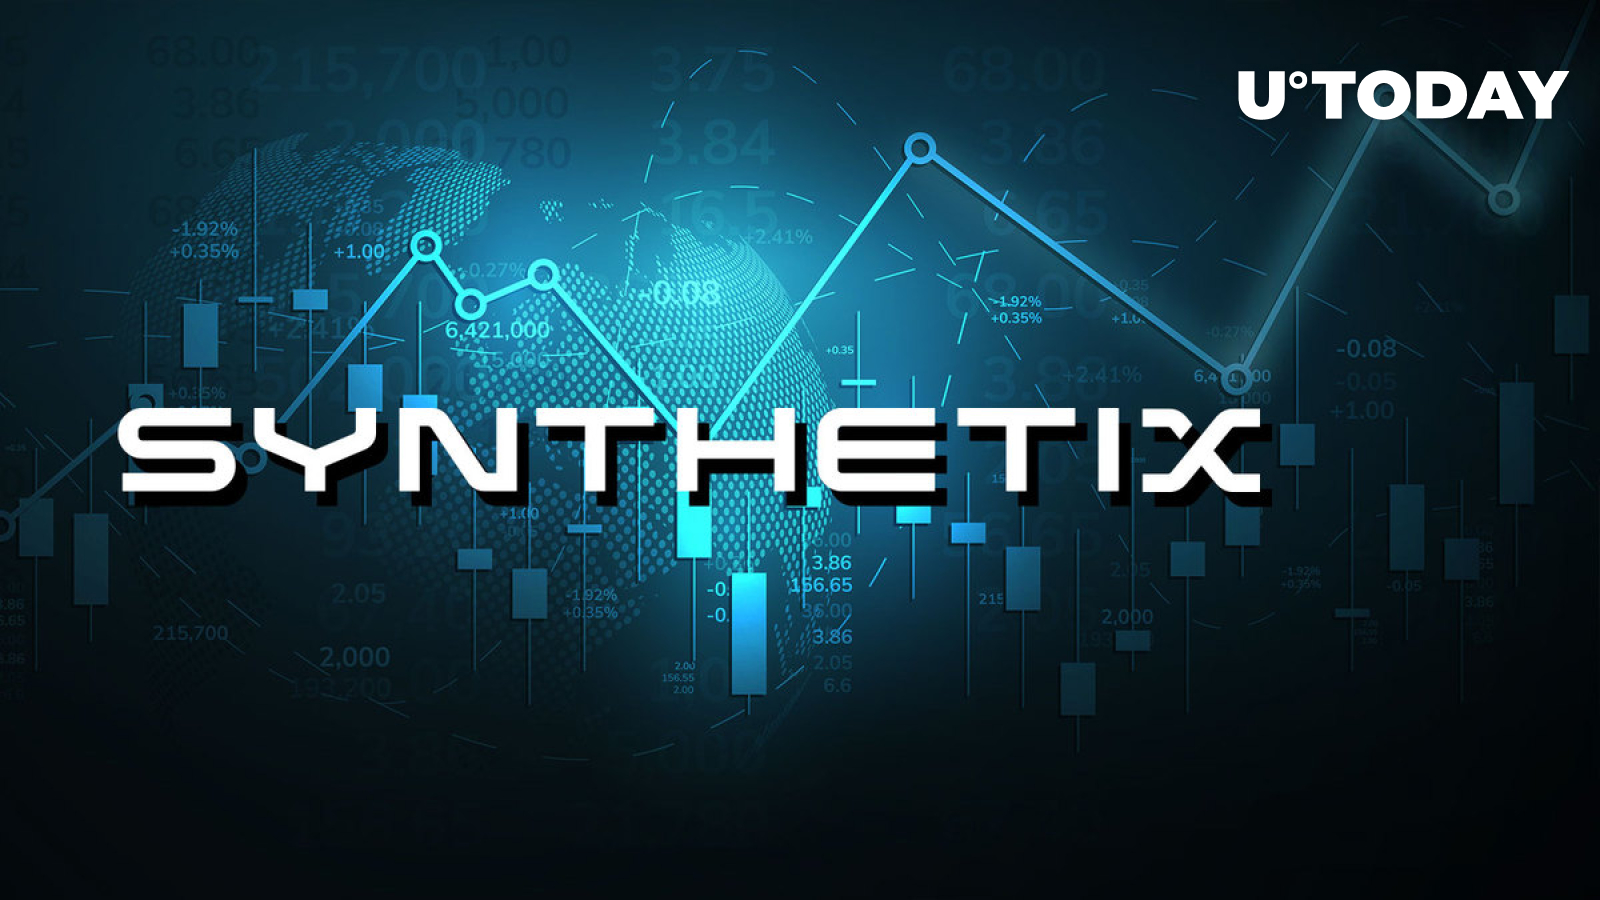 What’s Synthetix (SNX) and Why Is It Rallying Today?